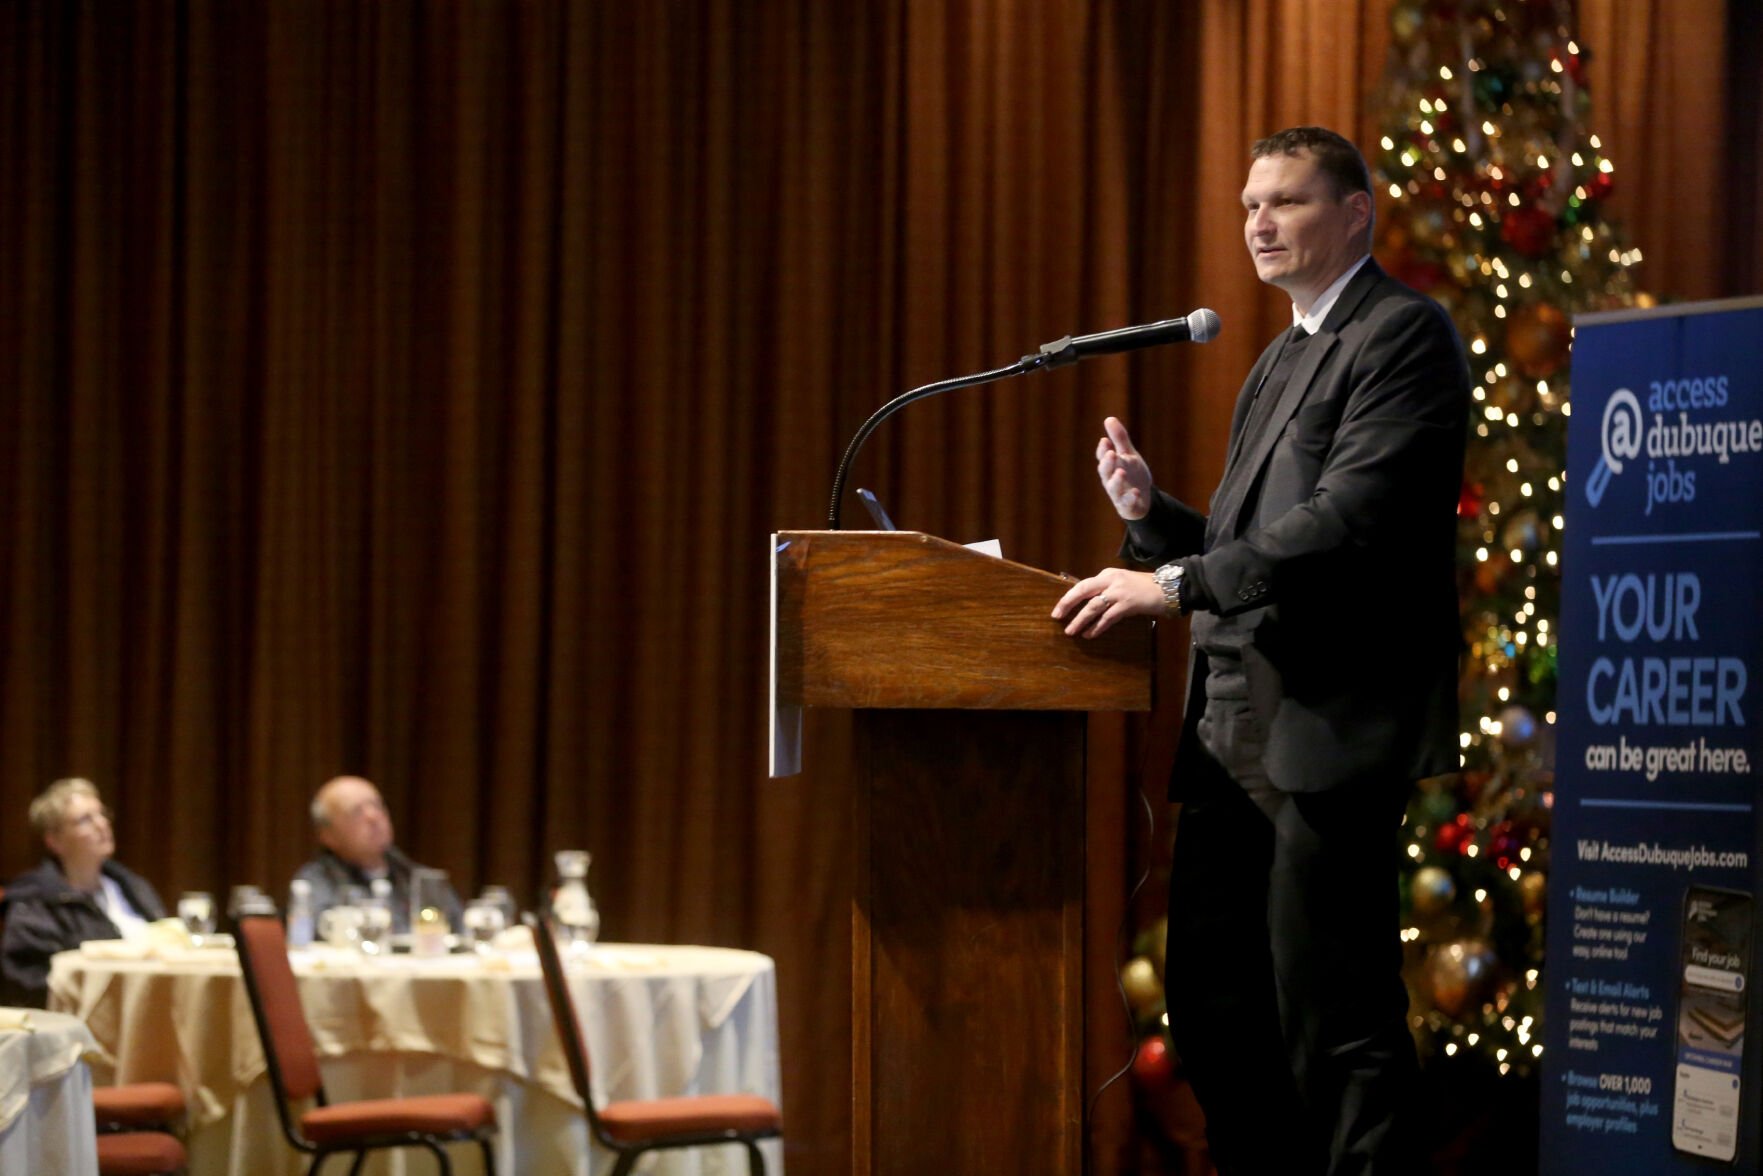 Jason E. White, vice president of business services at Greater Dubuque Development Corp., speaks during the organization’s workforce breakfast at Diamond Jo Casino in Dubuque on Friday, Dec. 9, 2022.    PHOTO CREDIT: JESSICA REILLY